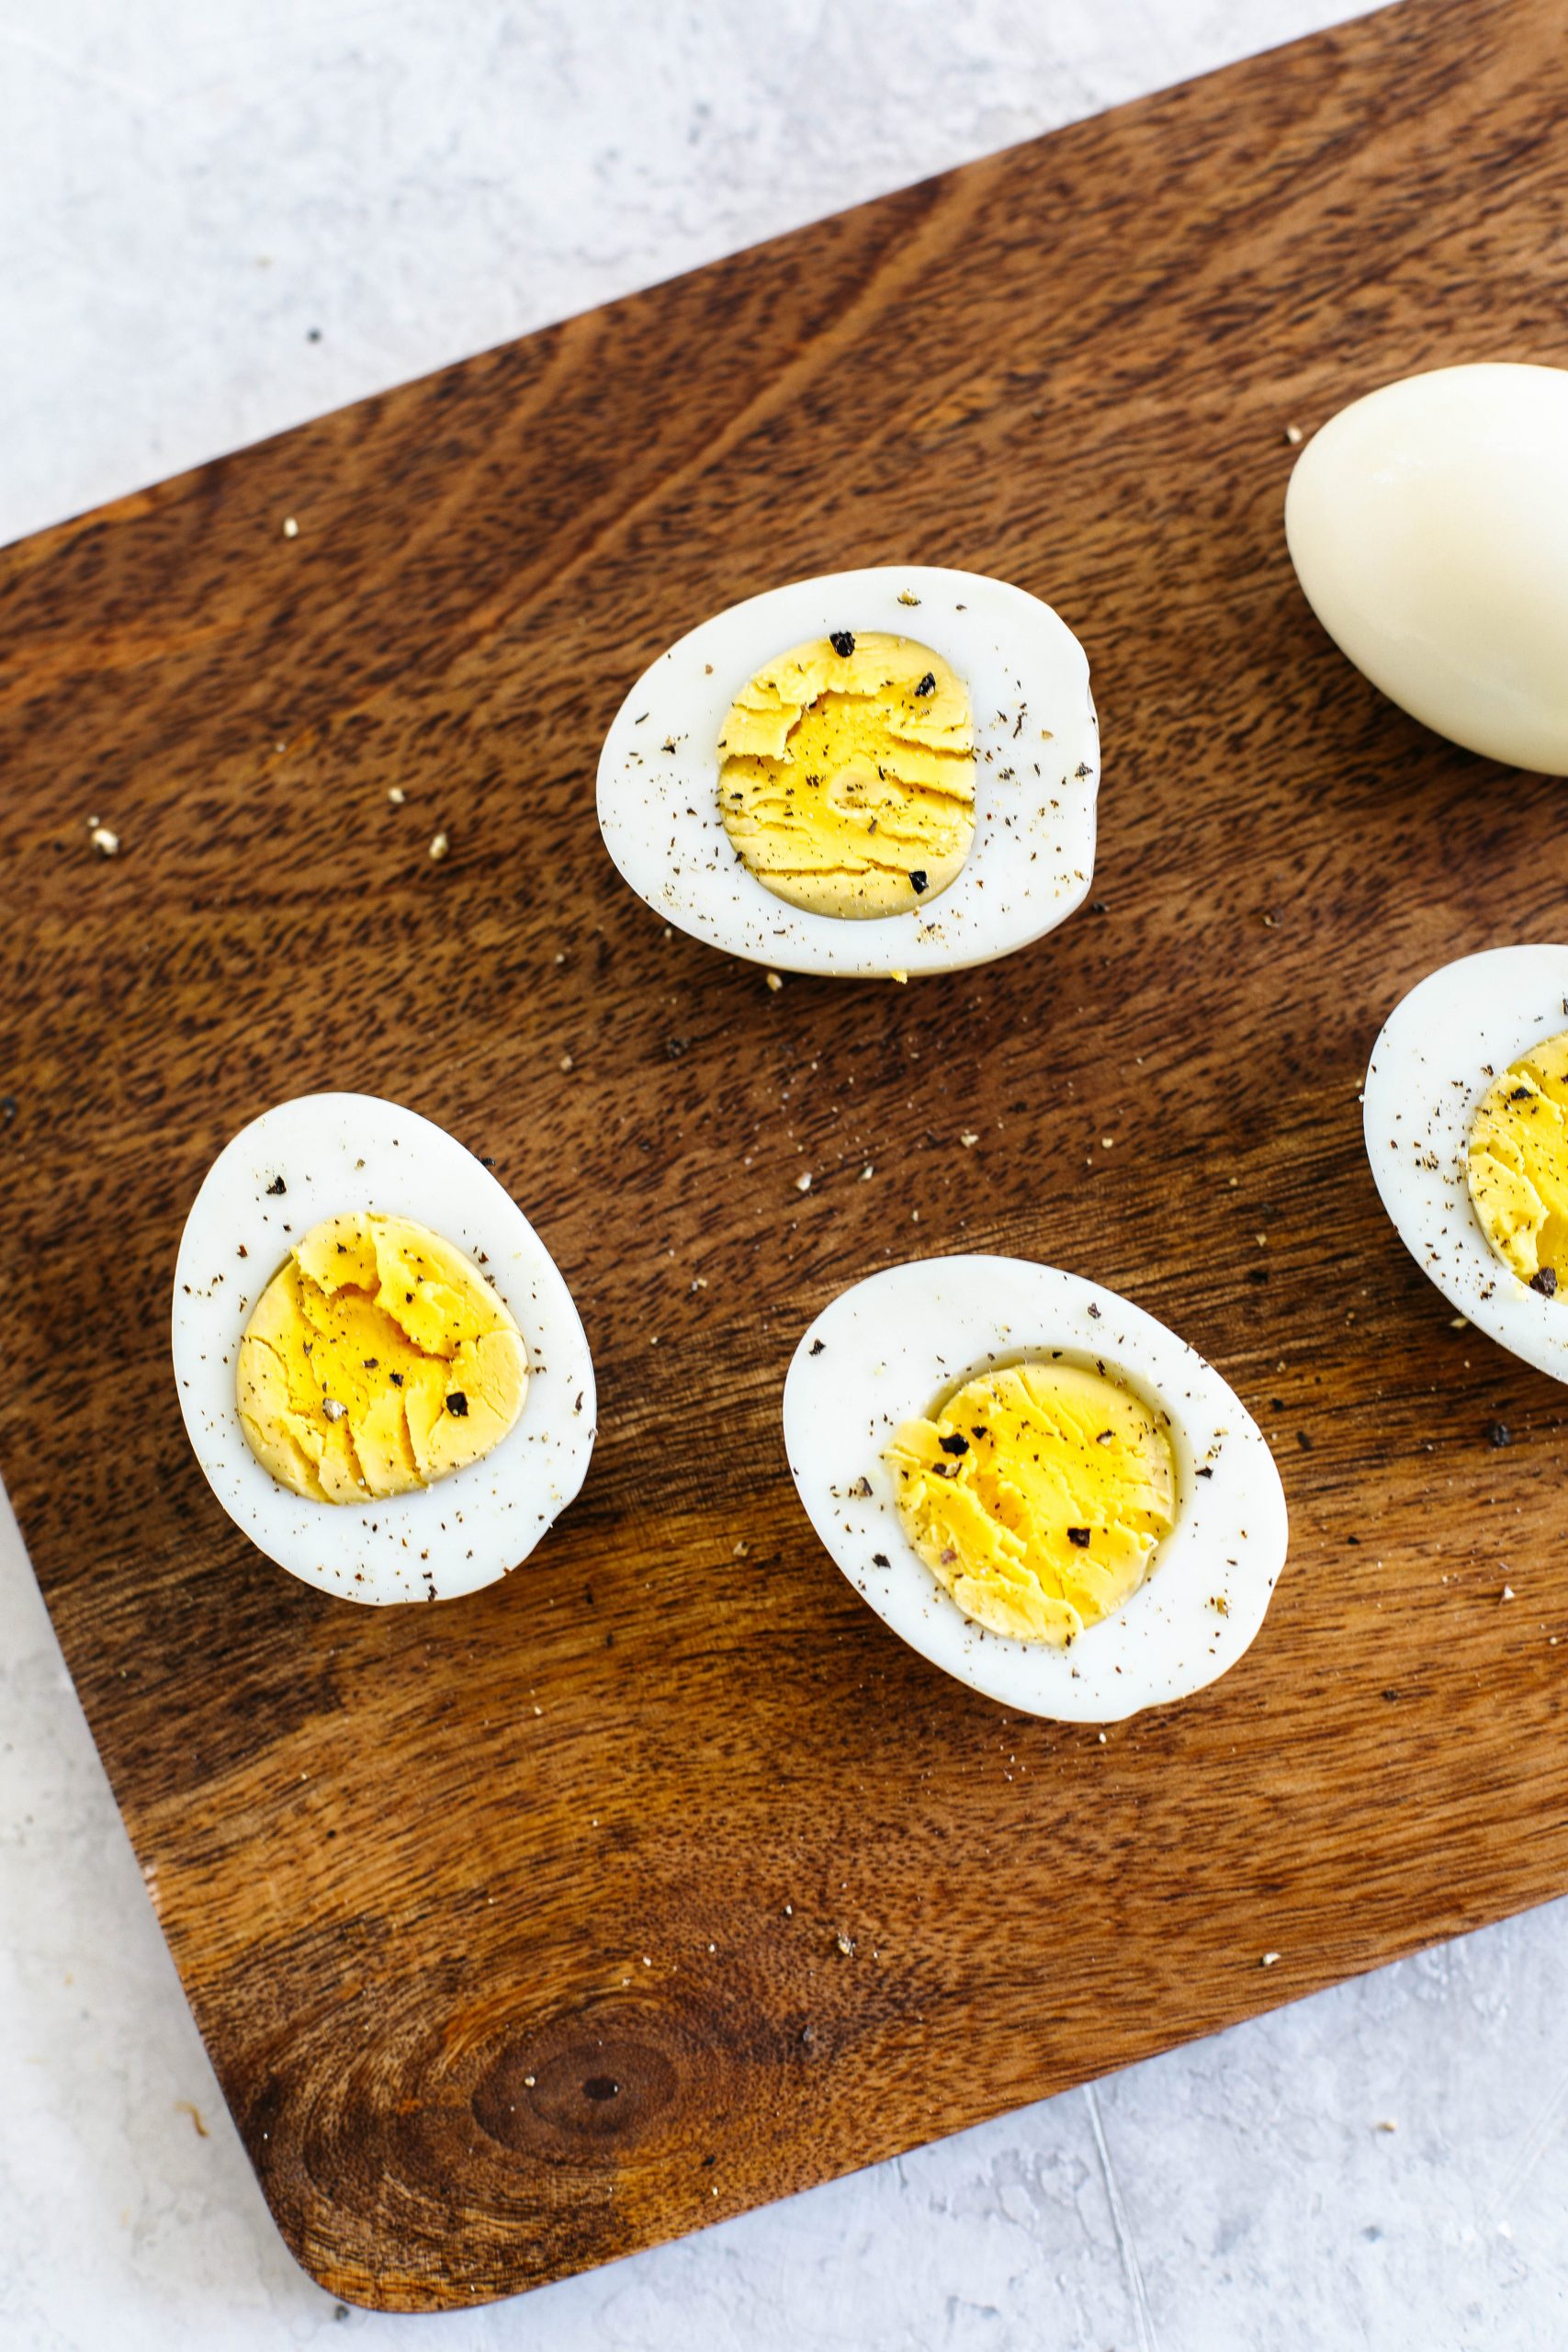 Perfectly cooked hard boiled eggs in the Instant Pot that are easy to peel and ready in just 15 minutes!  Hands down the easiest method and perfect for meal prep!